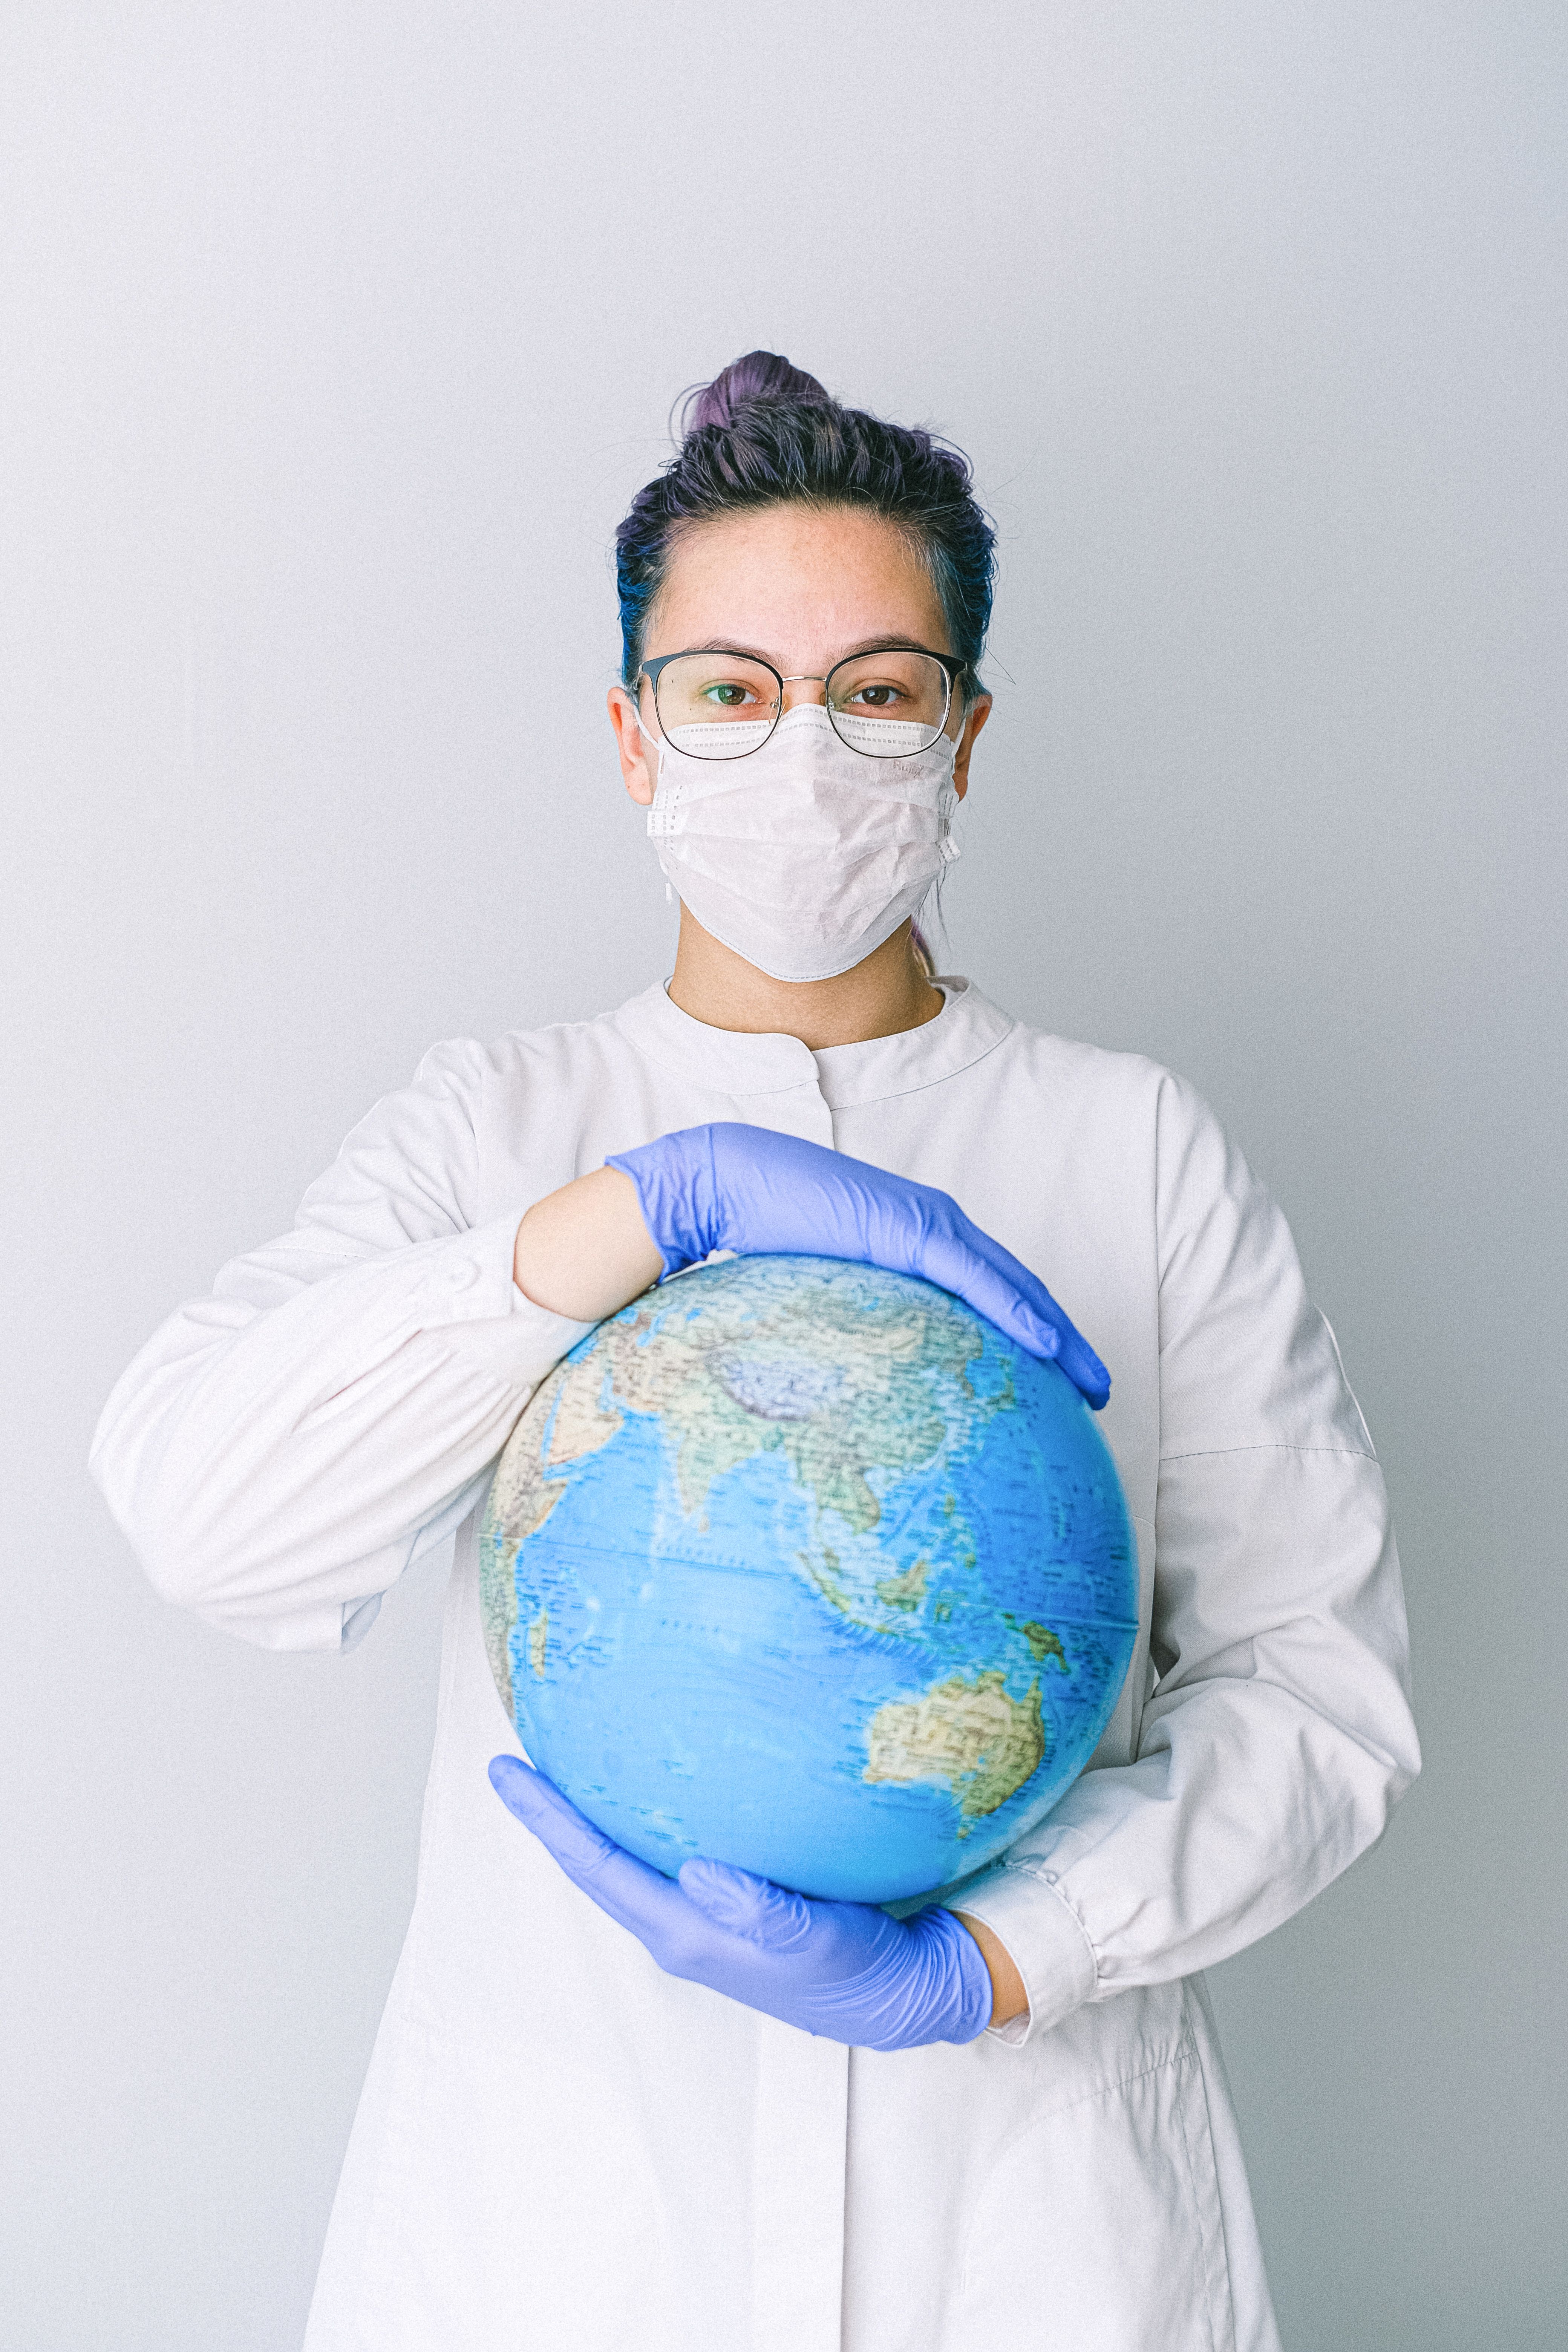 Person With a Face Mask and Latex Gloves Holding a Globe · Free